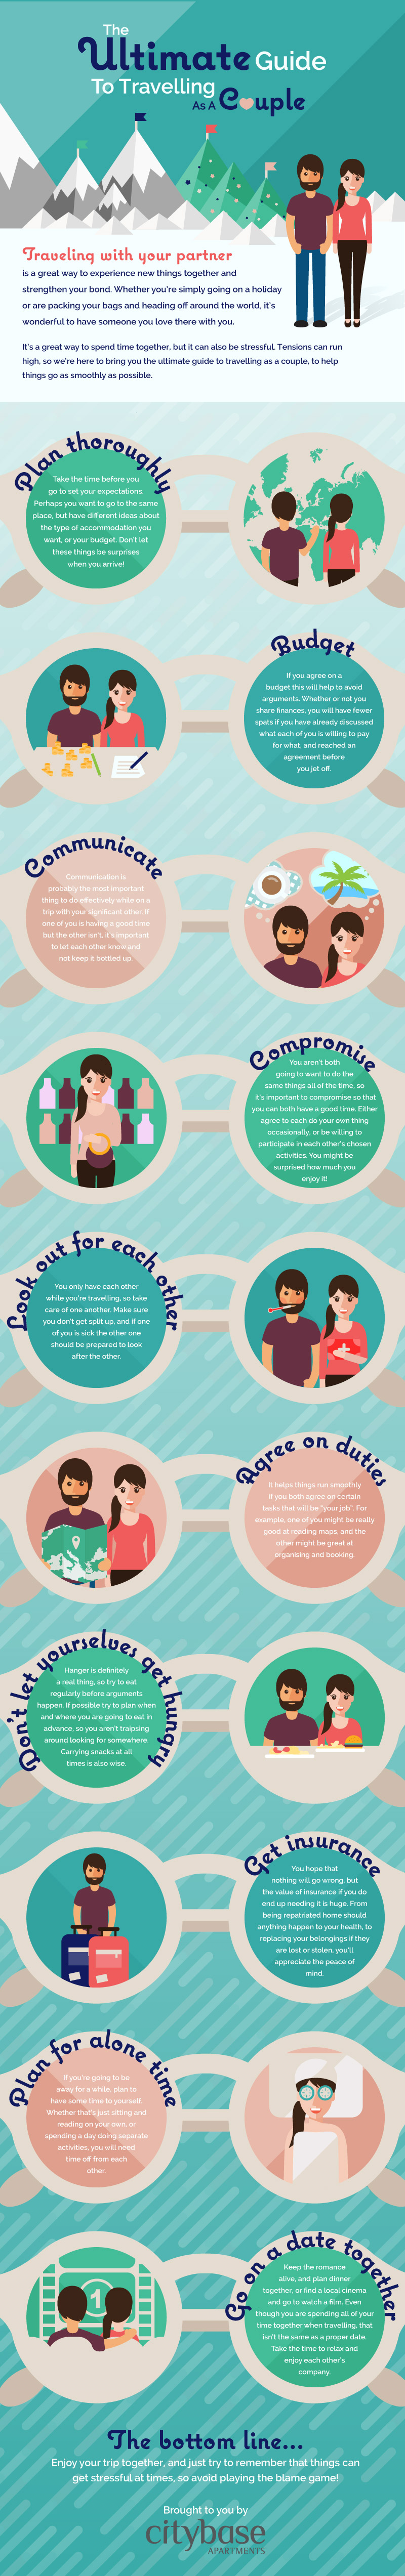 Travelling as a couple infographic